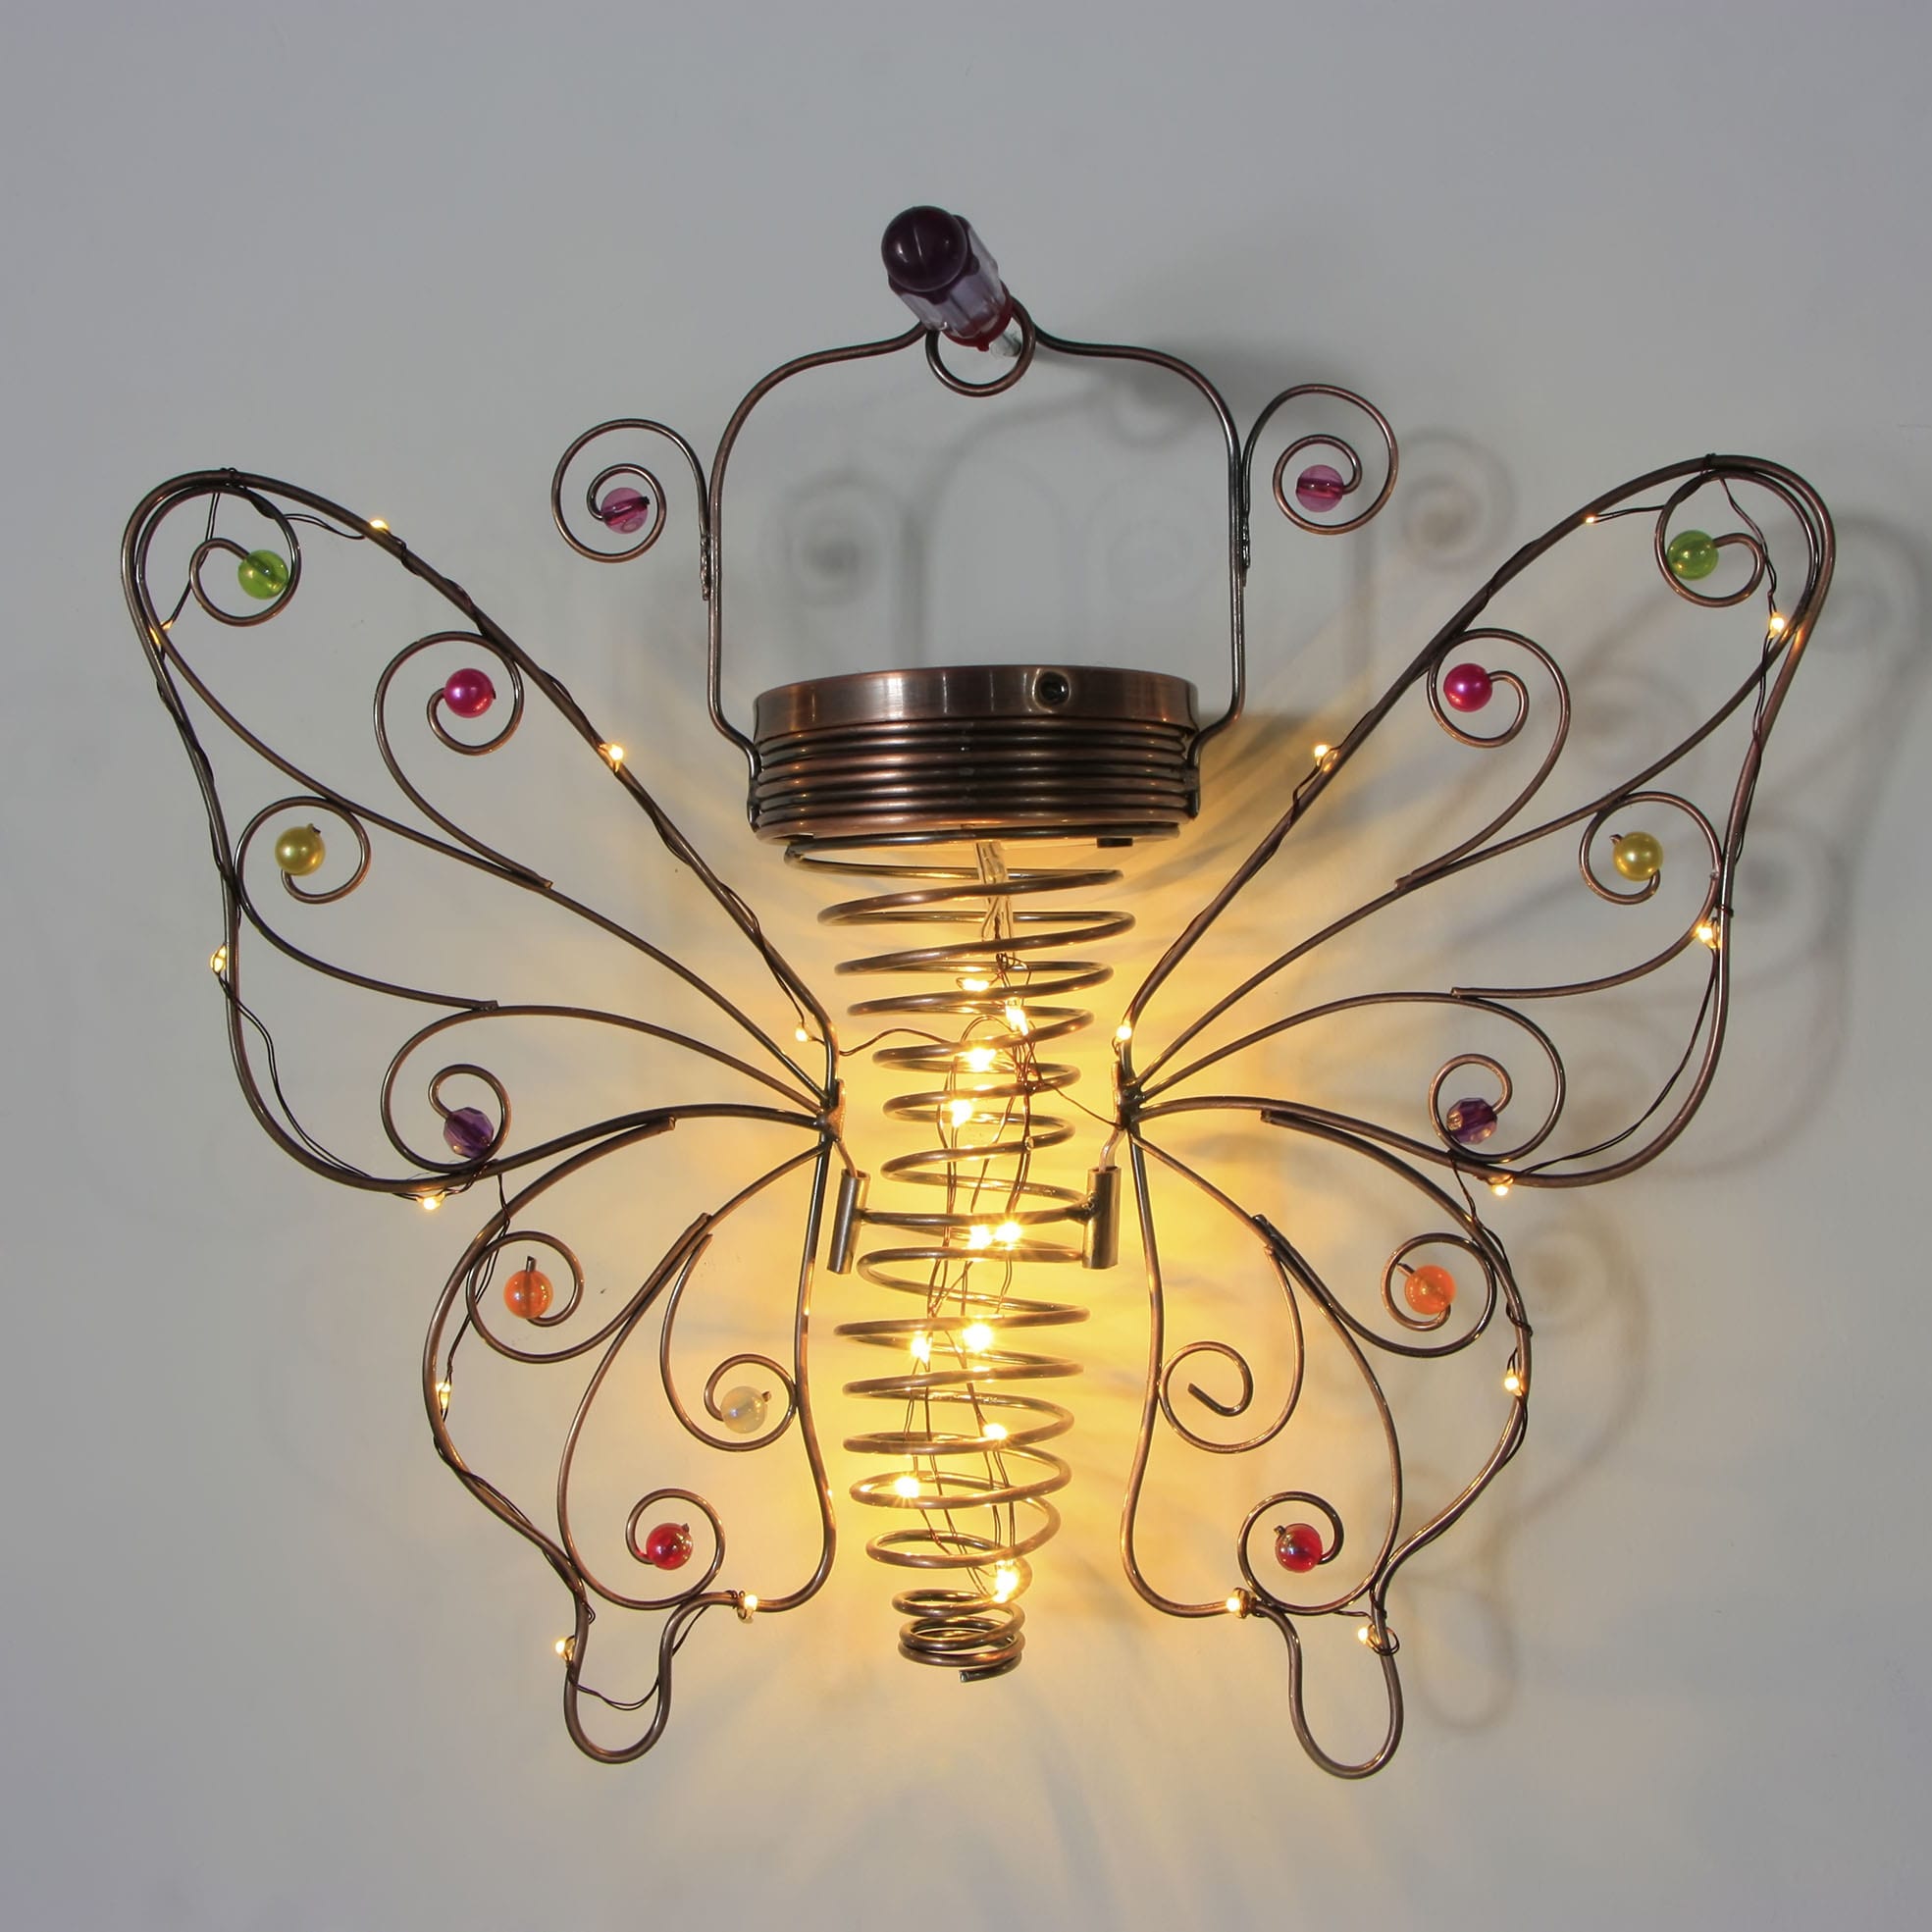 Butterfly Wire Lantern Solar Operated Hanging Decoration